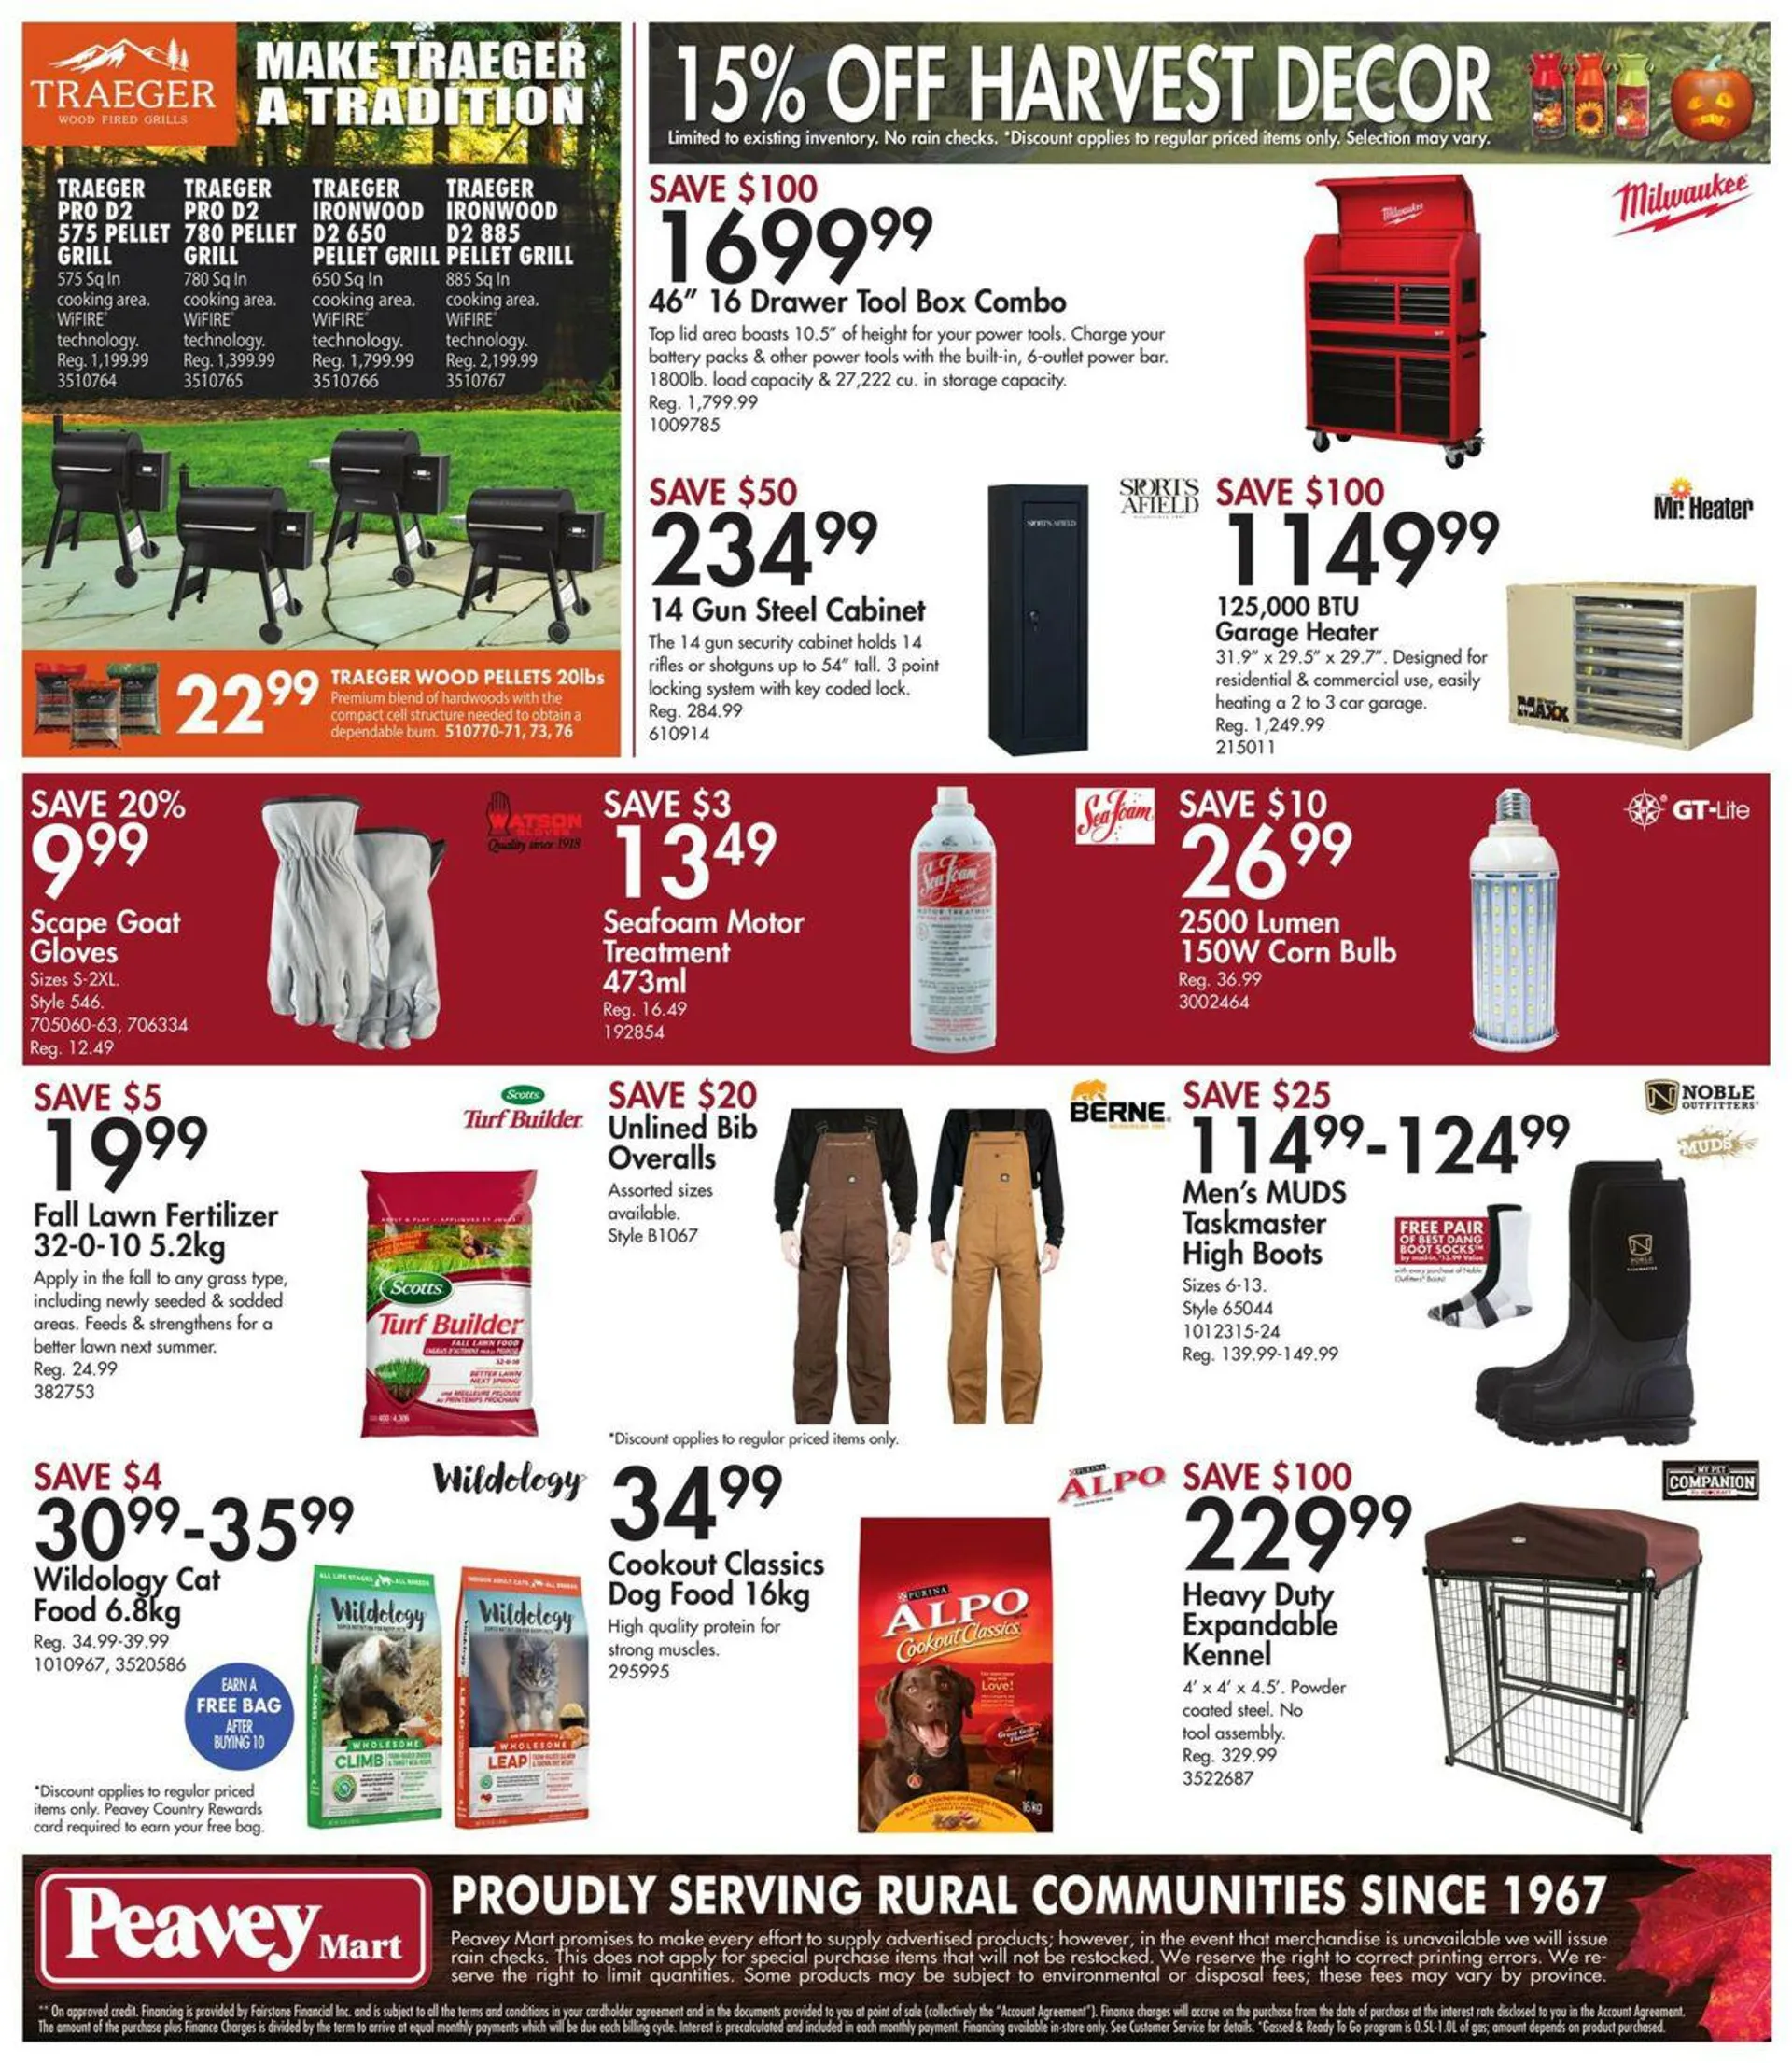 TSC Stores Current flyer - 15